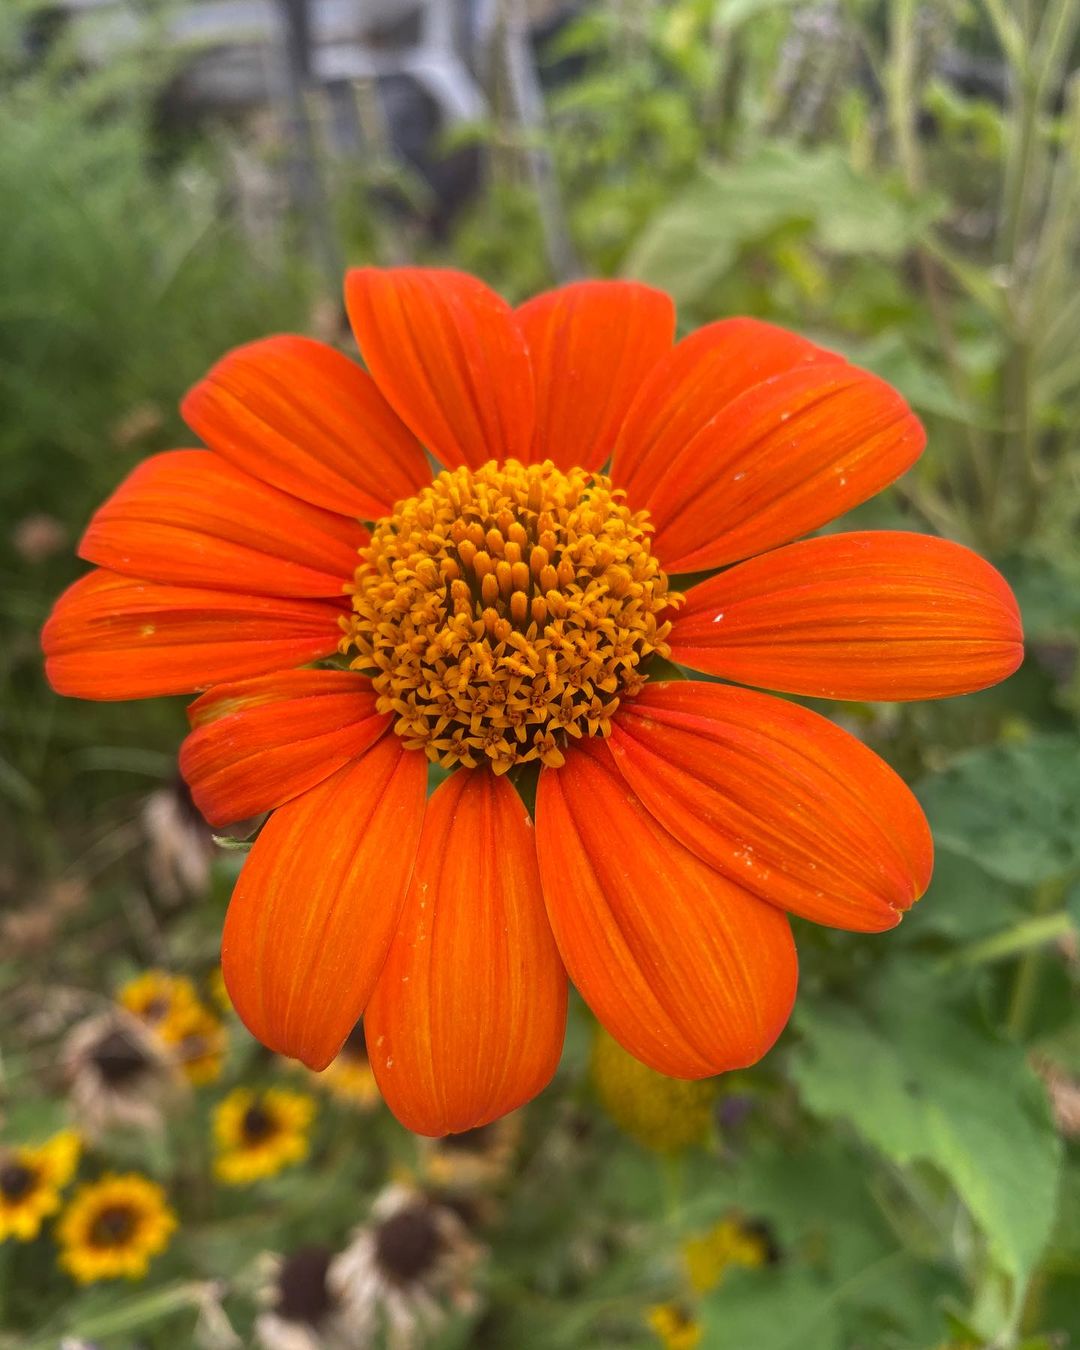 Vibrant Mexican Sunflower blooming in a garden.